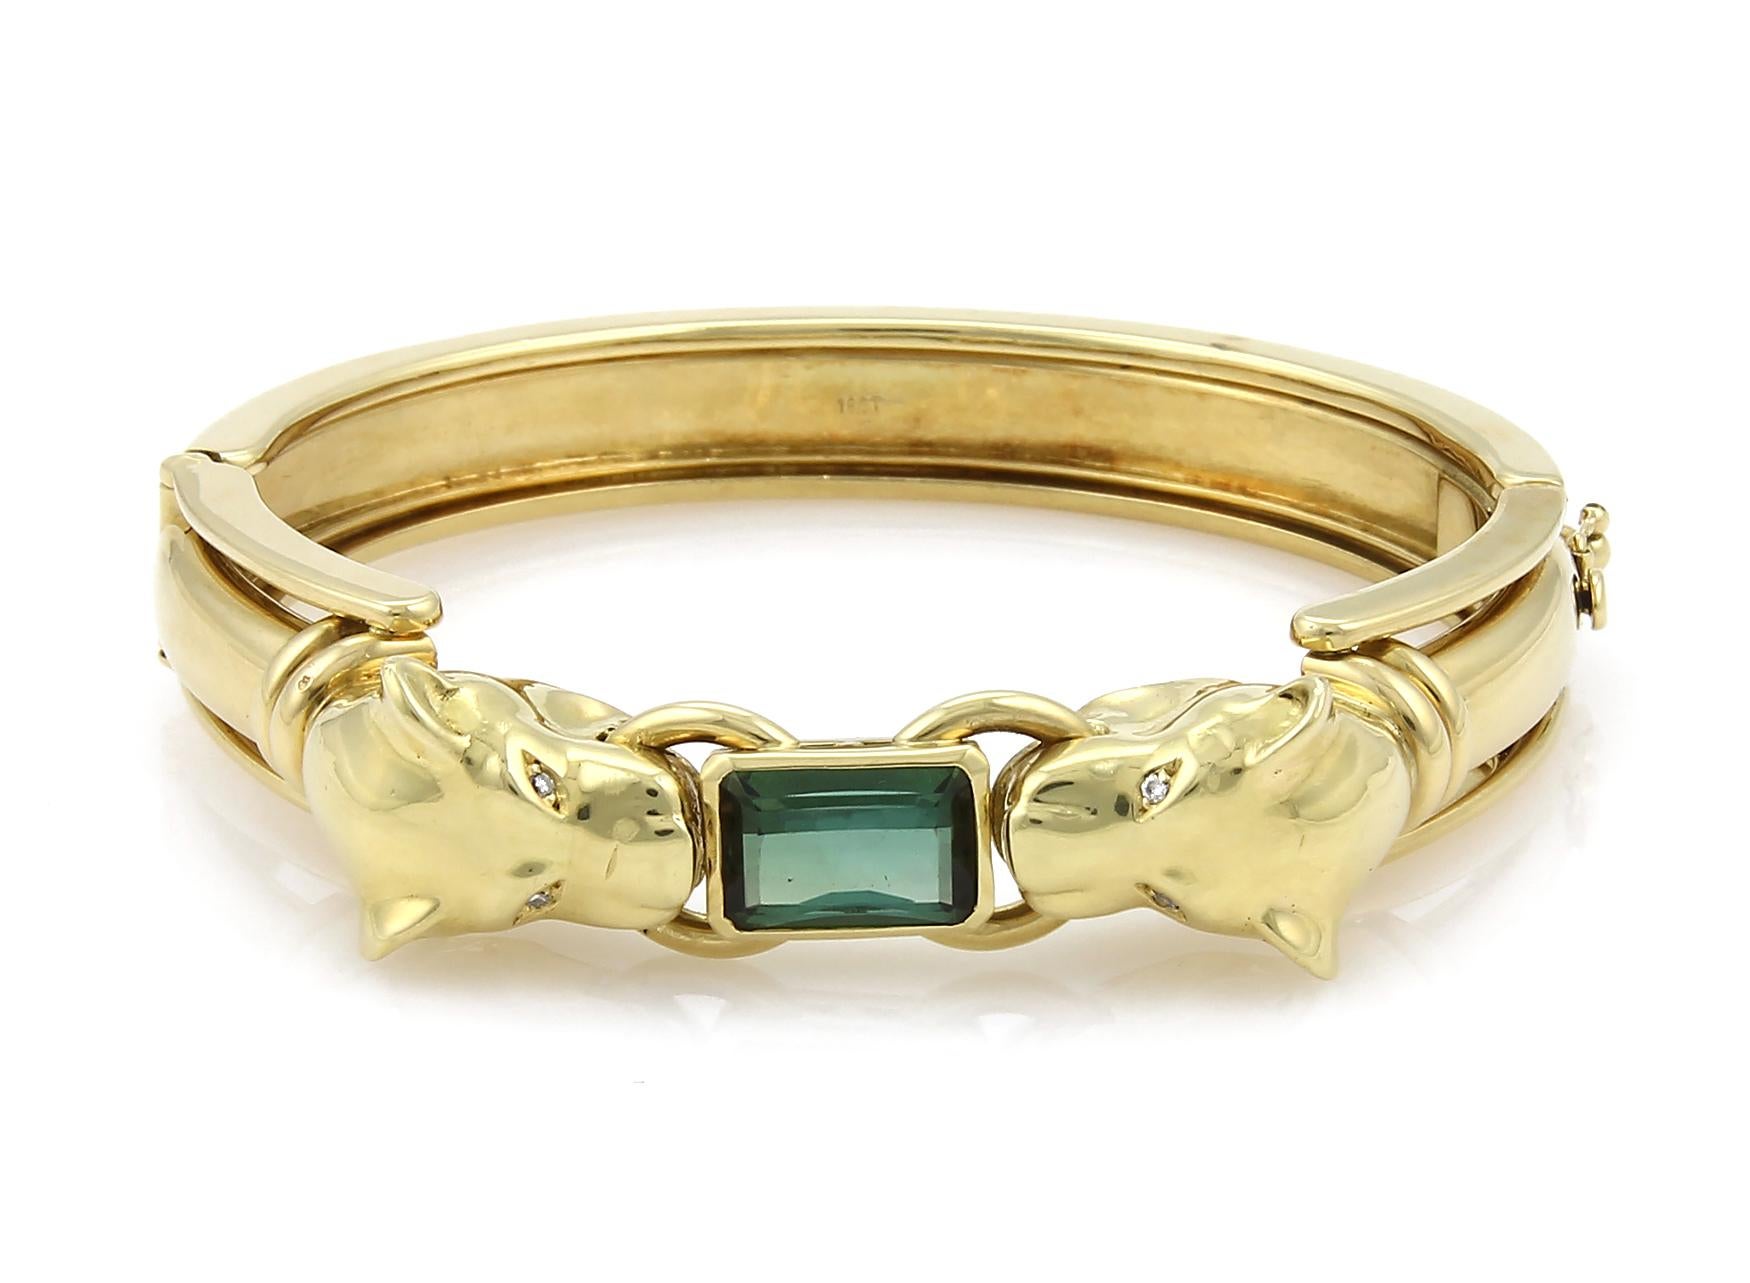 This is an amazing sculpted bracelet, forged from 18k yellow gold with a high polished finish it features a double panther head with a stunning emerald cut green tourmaline gemstone set between the panthers mouth, their eyes are small round diamonds